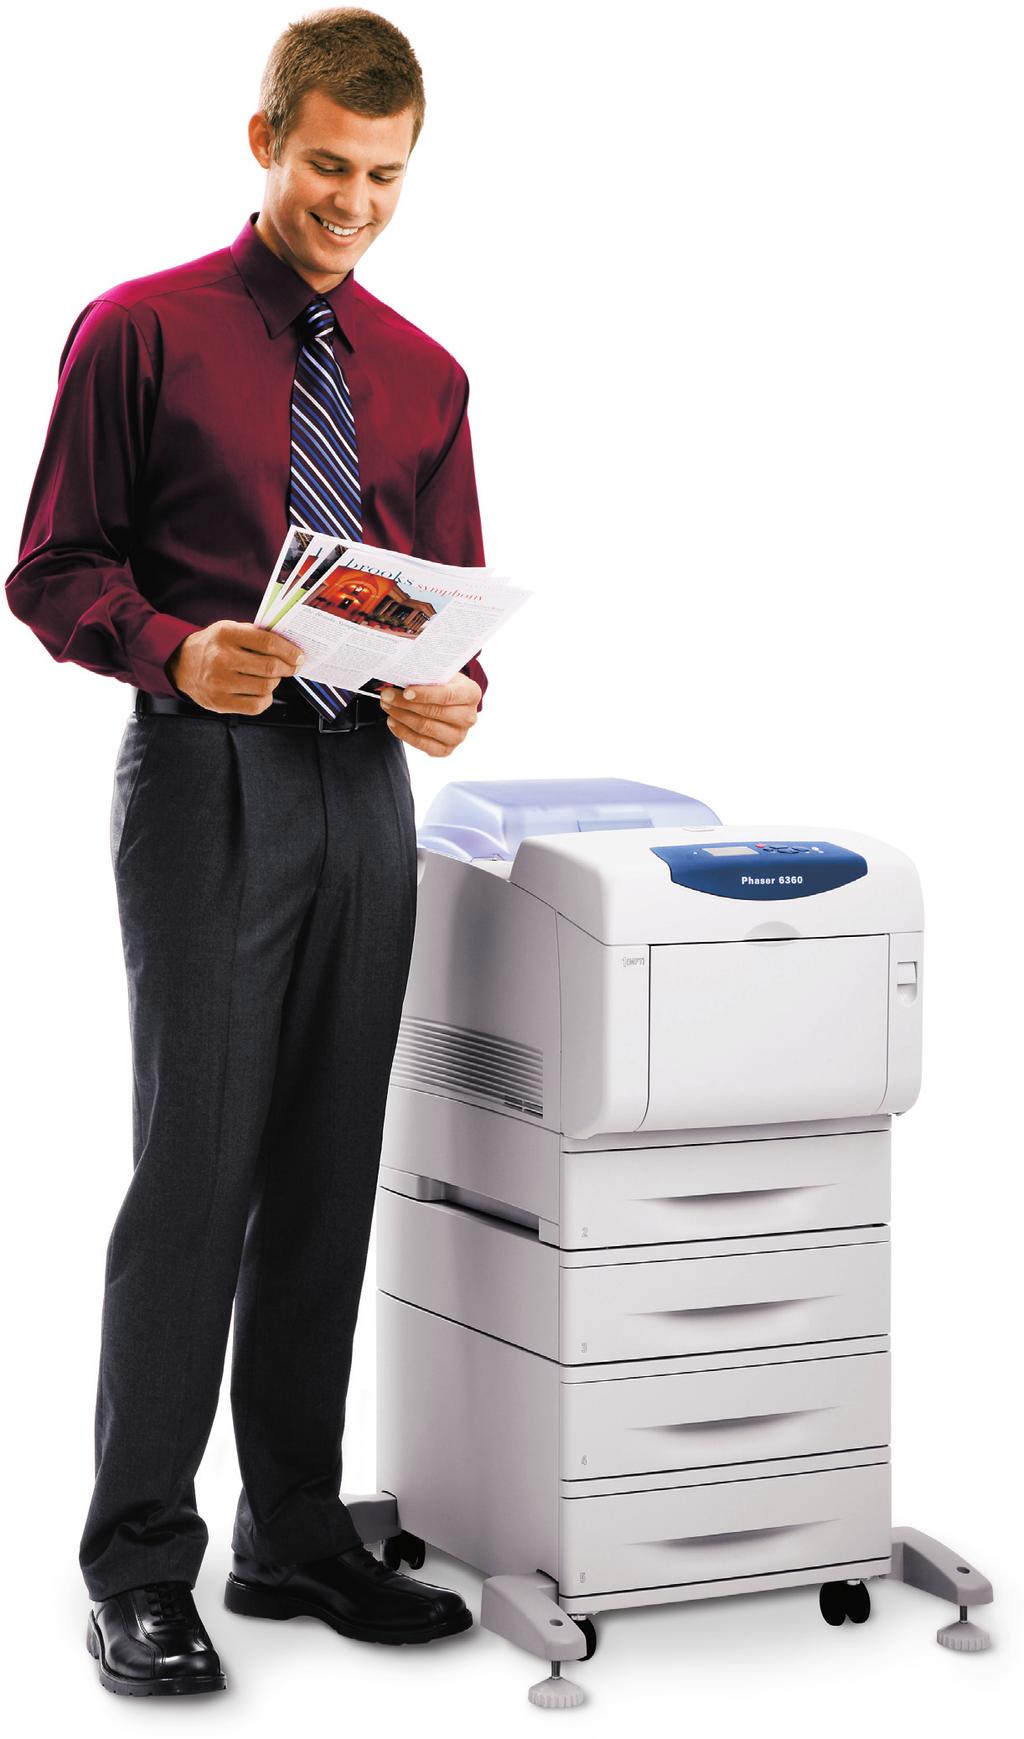 A maximum paper input of 2,350 pages and highcapacity toner cartridges keep the Phaser 6360 poised to handle a steady stream of print jobs.